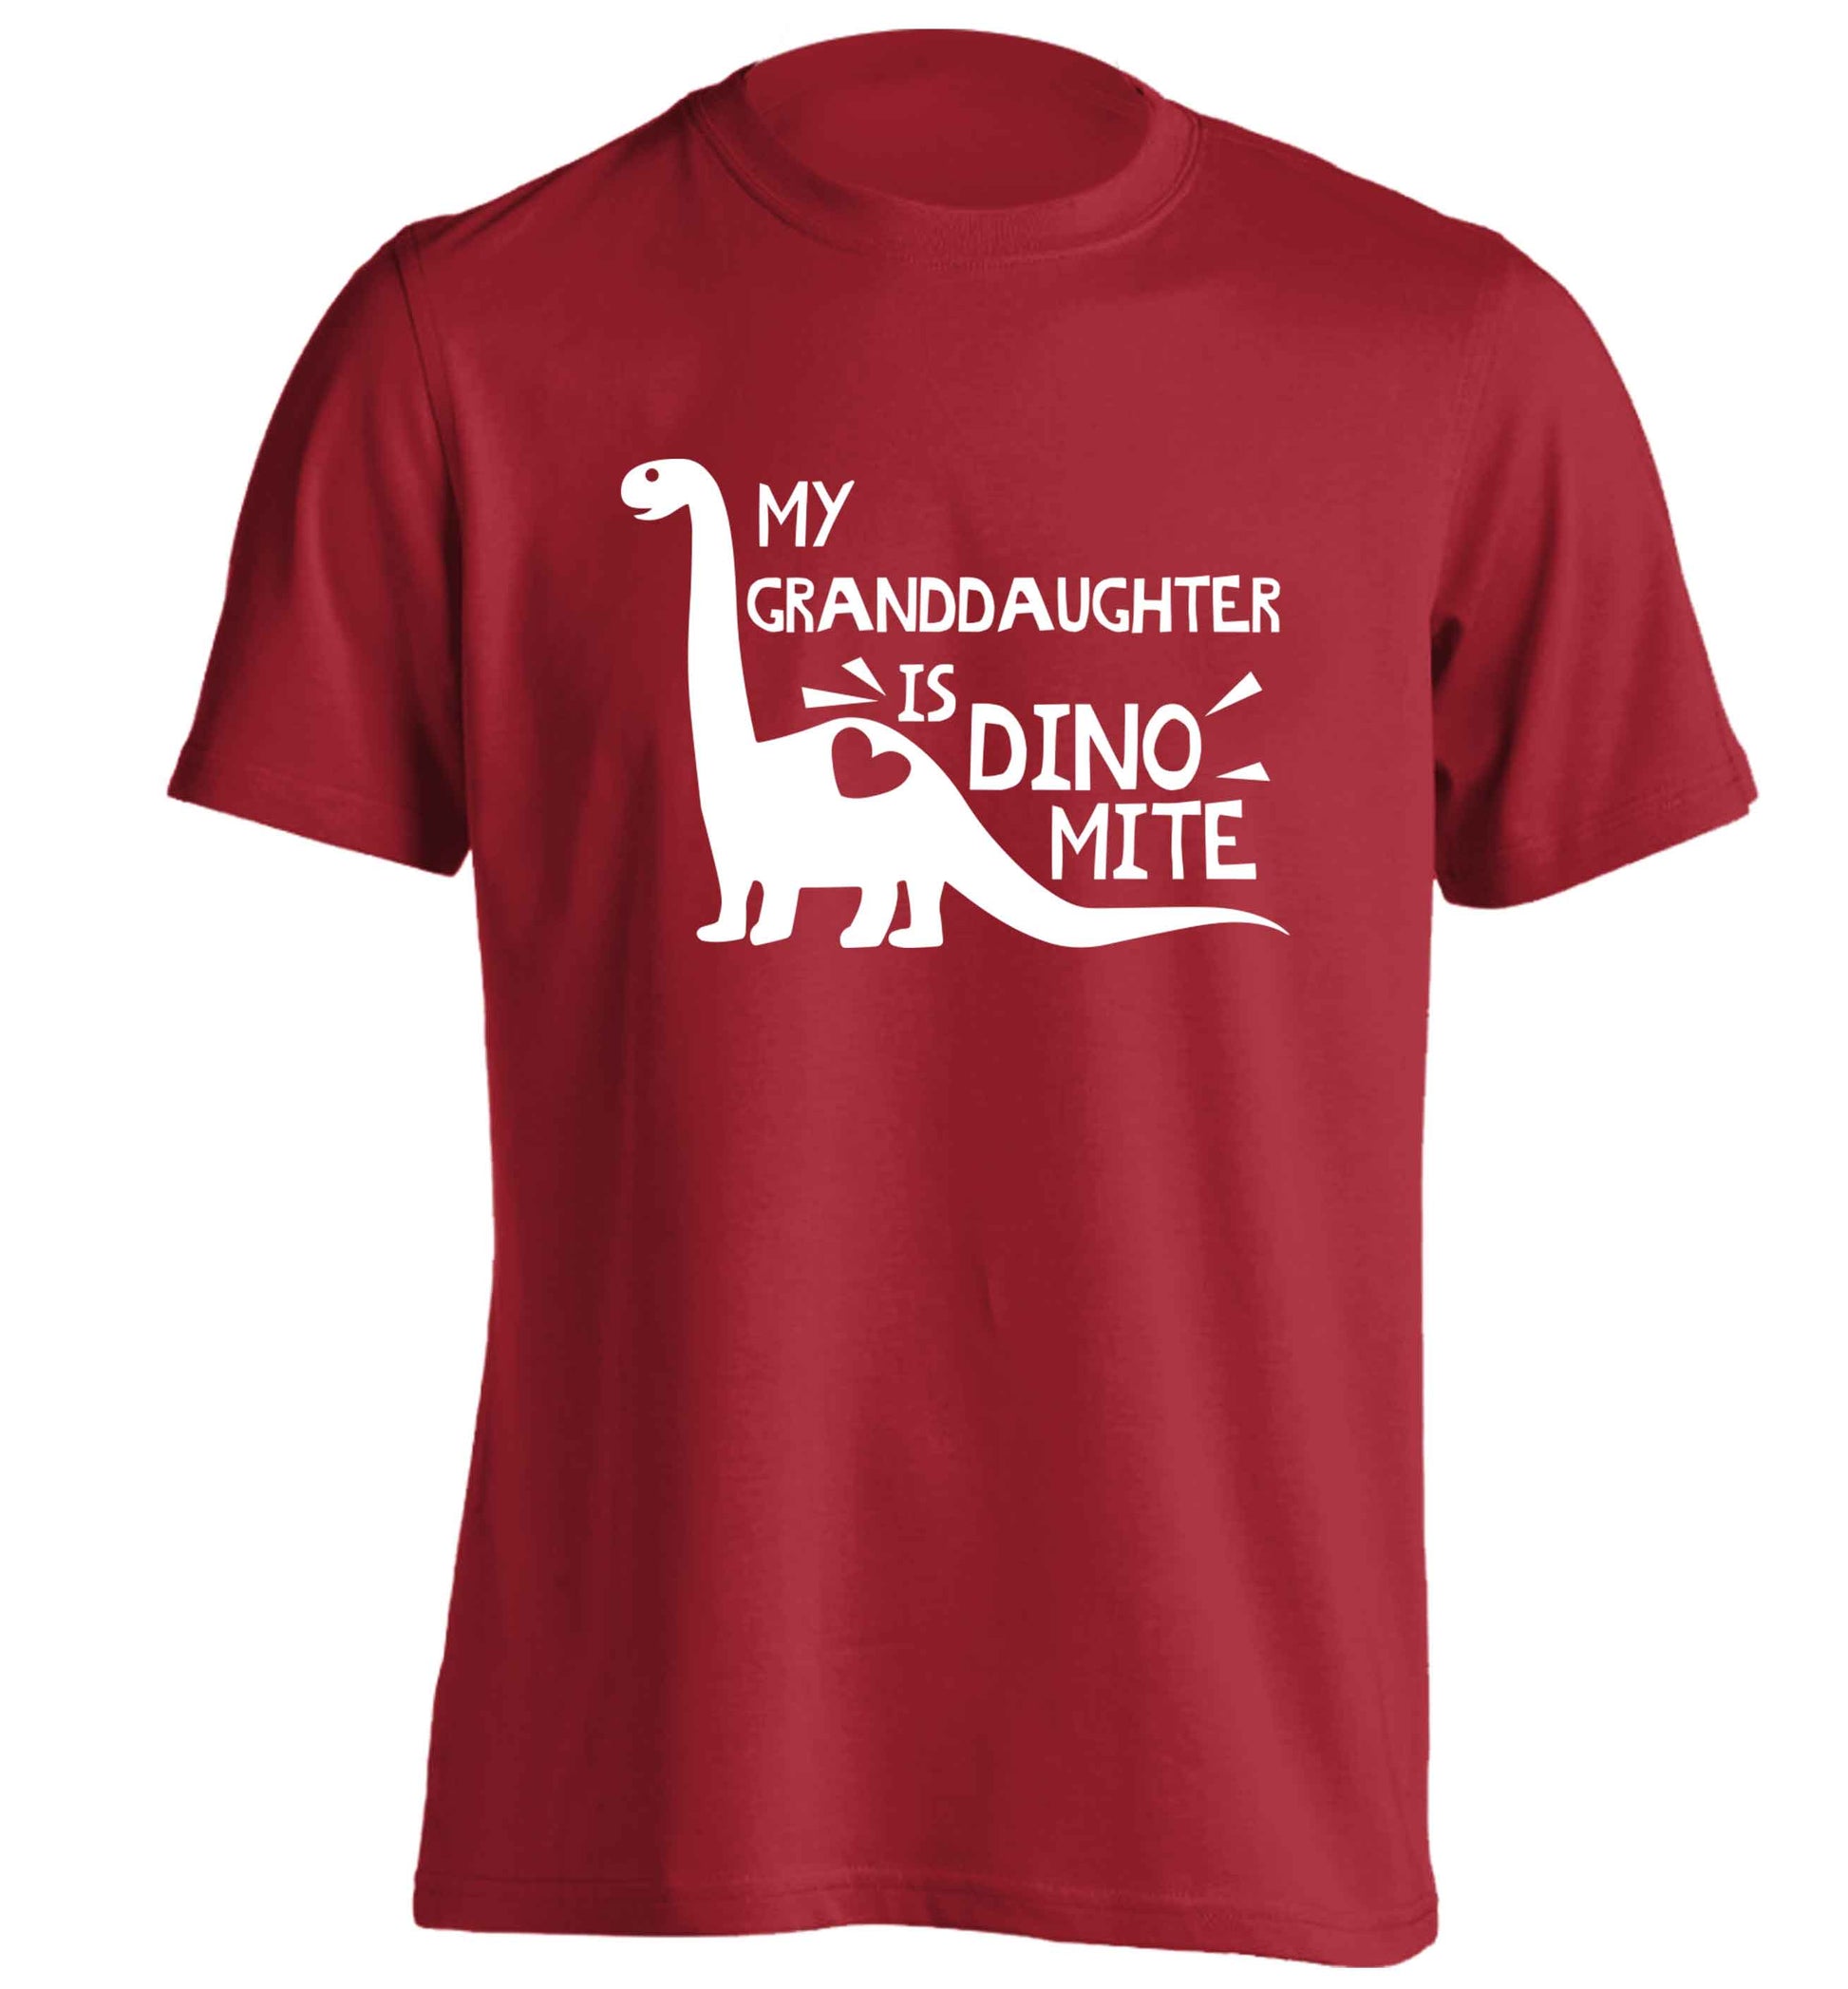 My granddaughter is dinomite! adults unisex red Tshirt 2XL